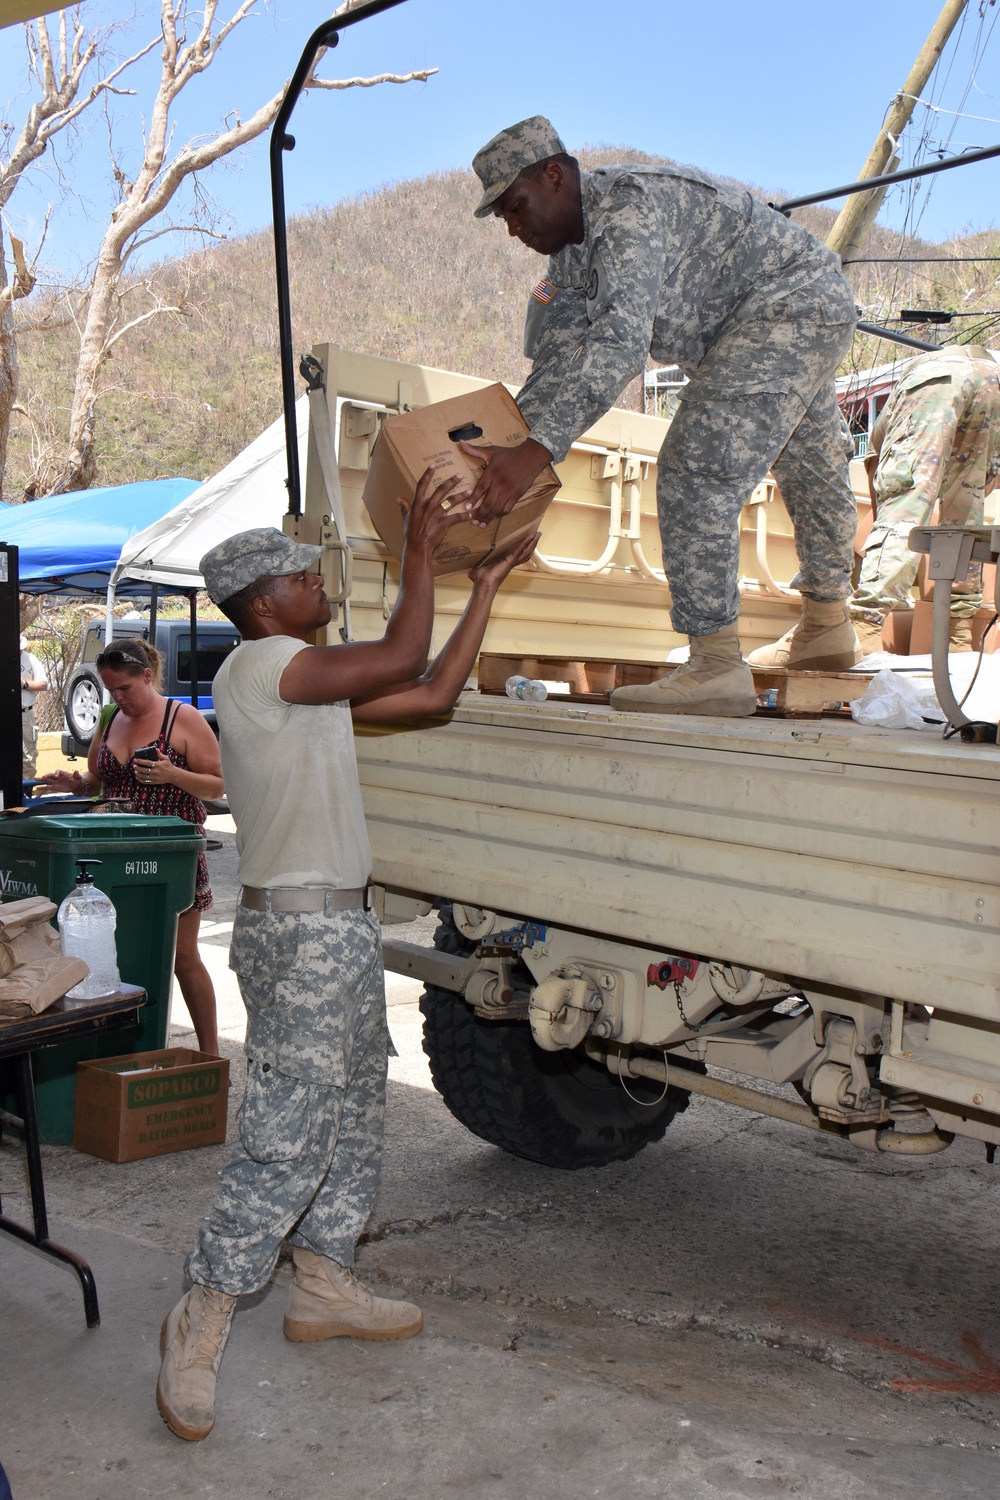 National Guard Soldiers aid disaster relief on St. John